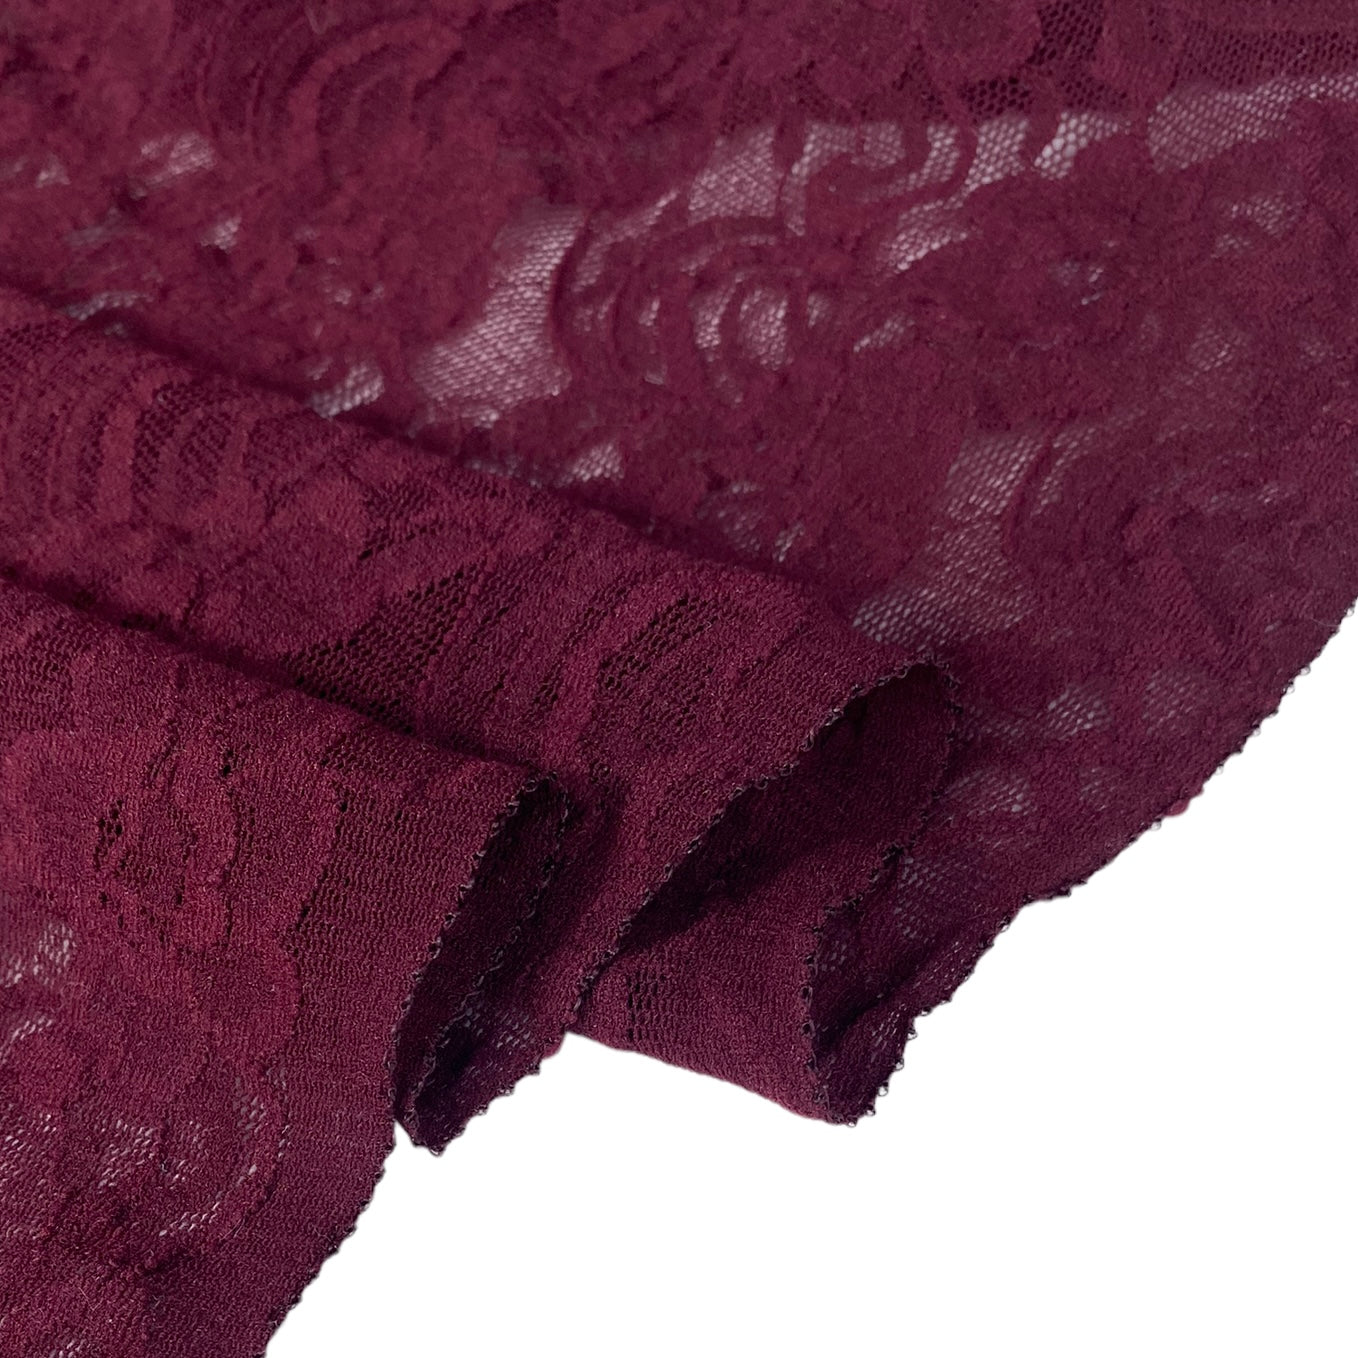 Stretch Floral Lace - Burgundy